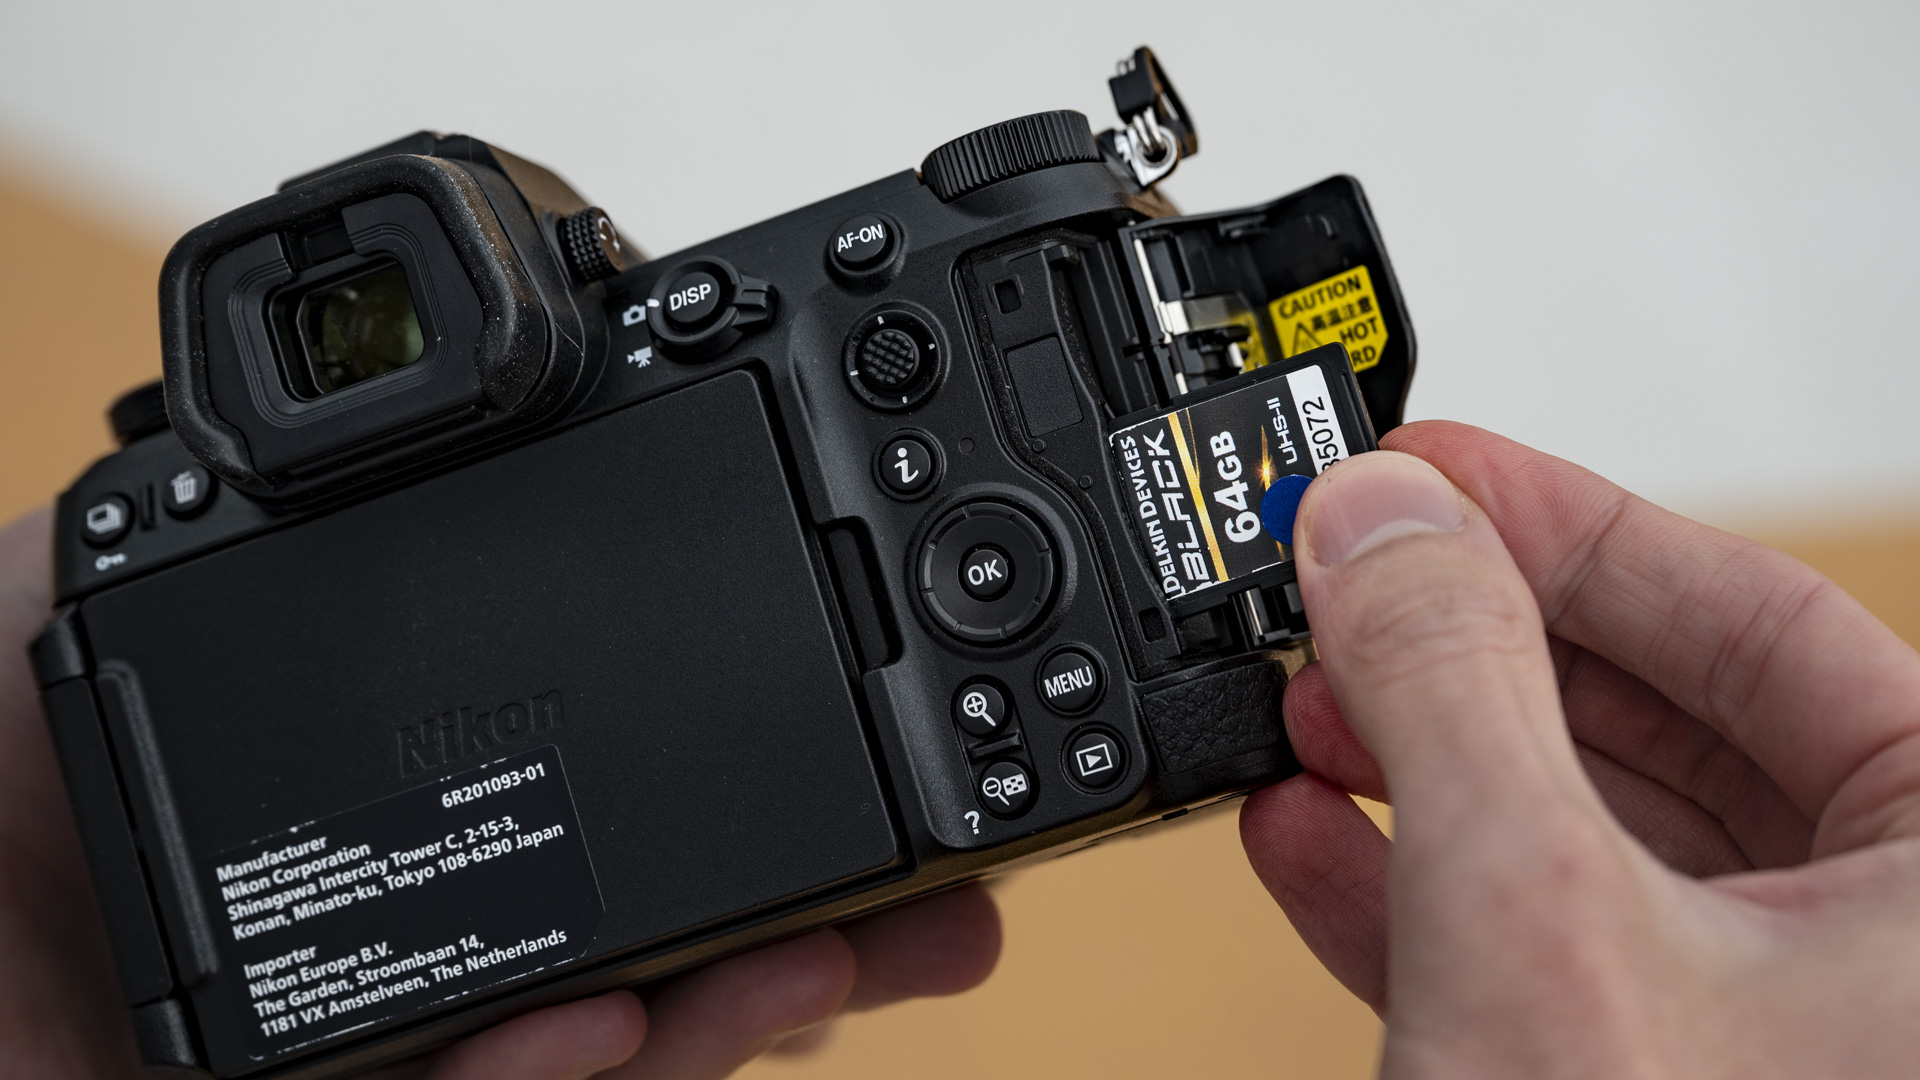 Nikon Z6 III camera in the hand with SD memory card being inserted